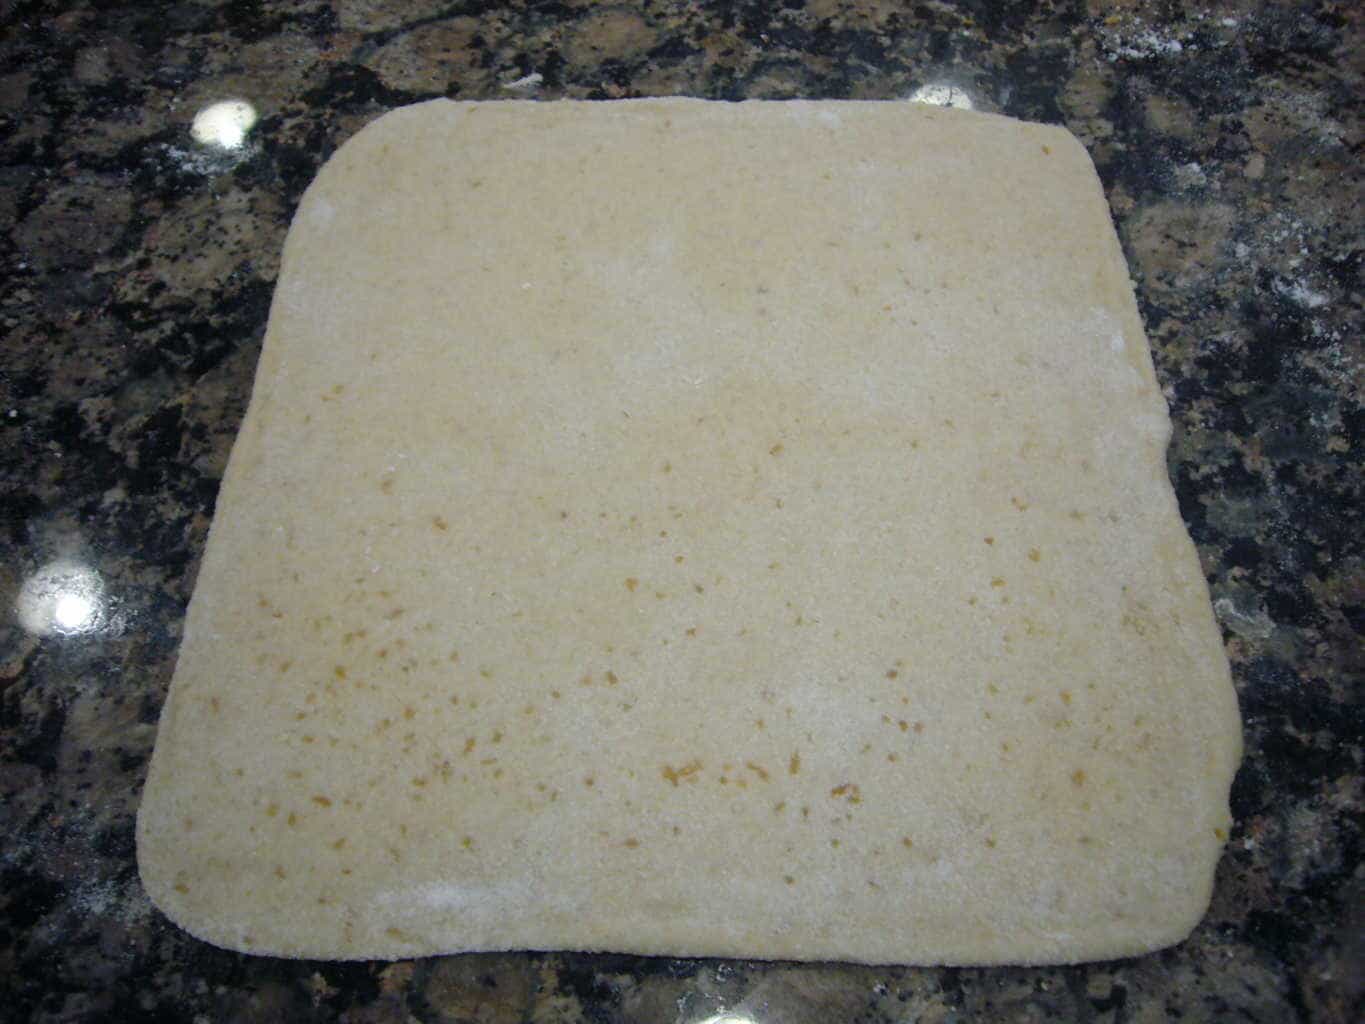 Roll it out into a 6 inch square layered bread for making egg paratha.